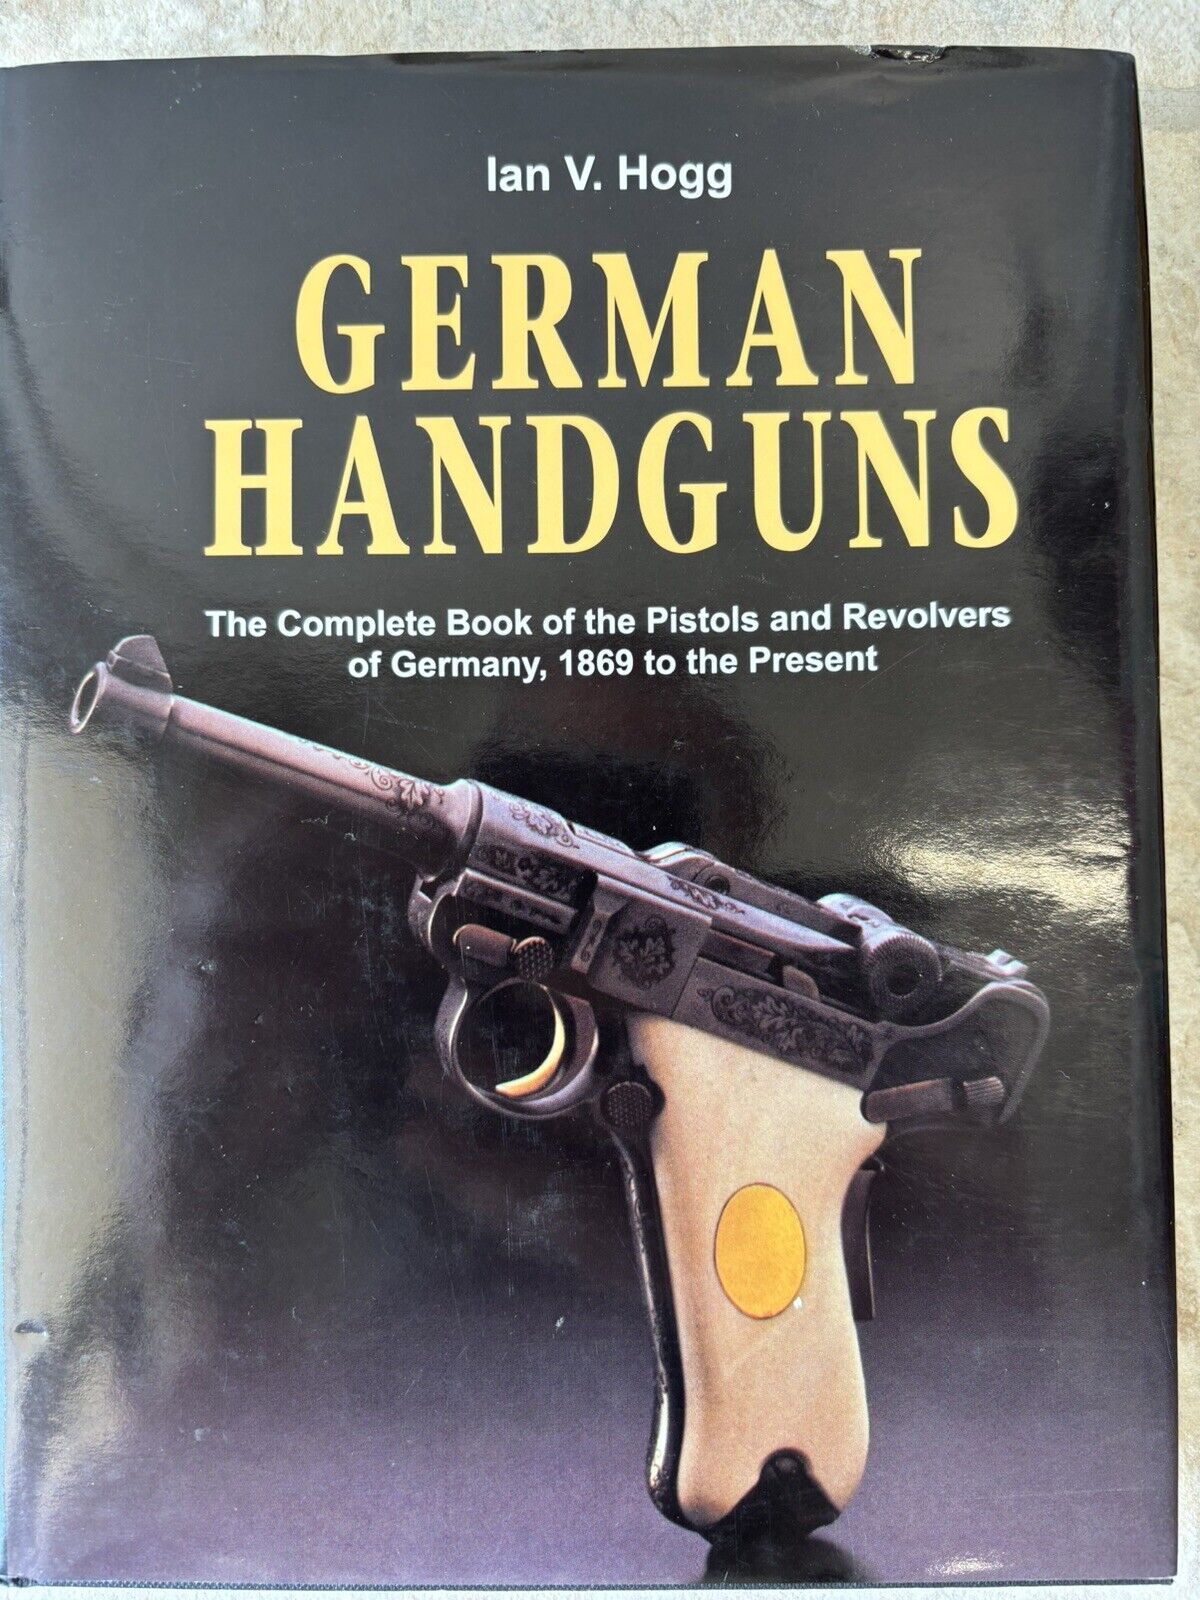 German Handguns The Complete Book of Pistols and Revolvers of Germany, Ian Hogg